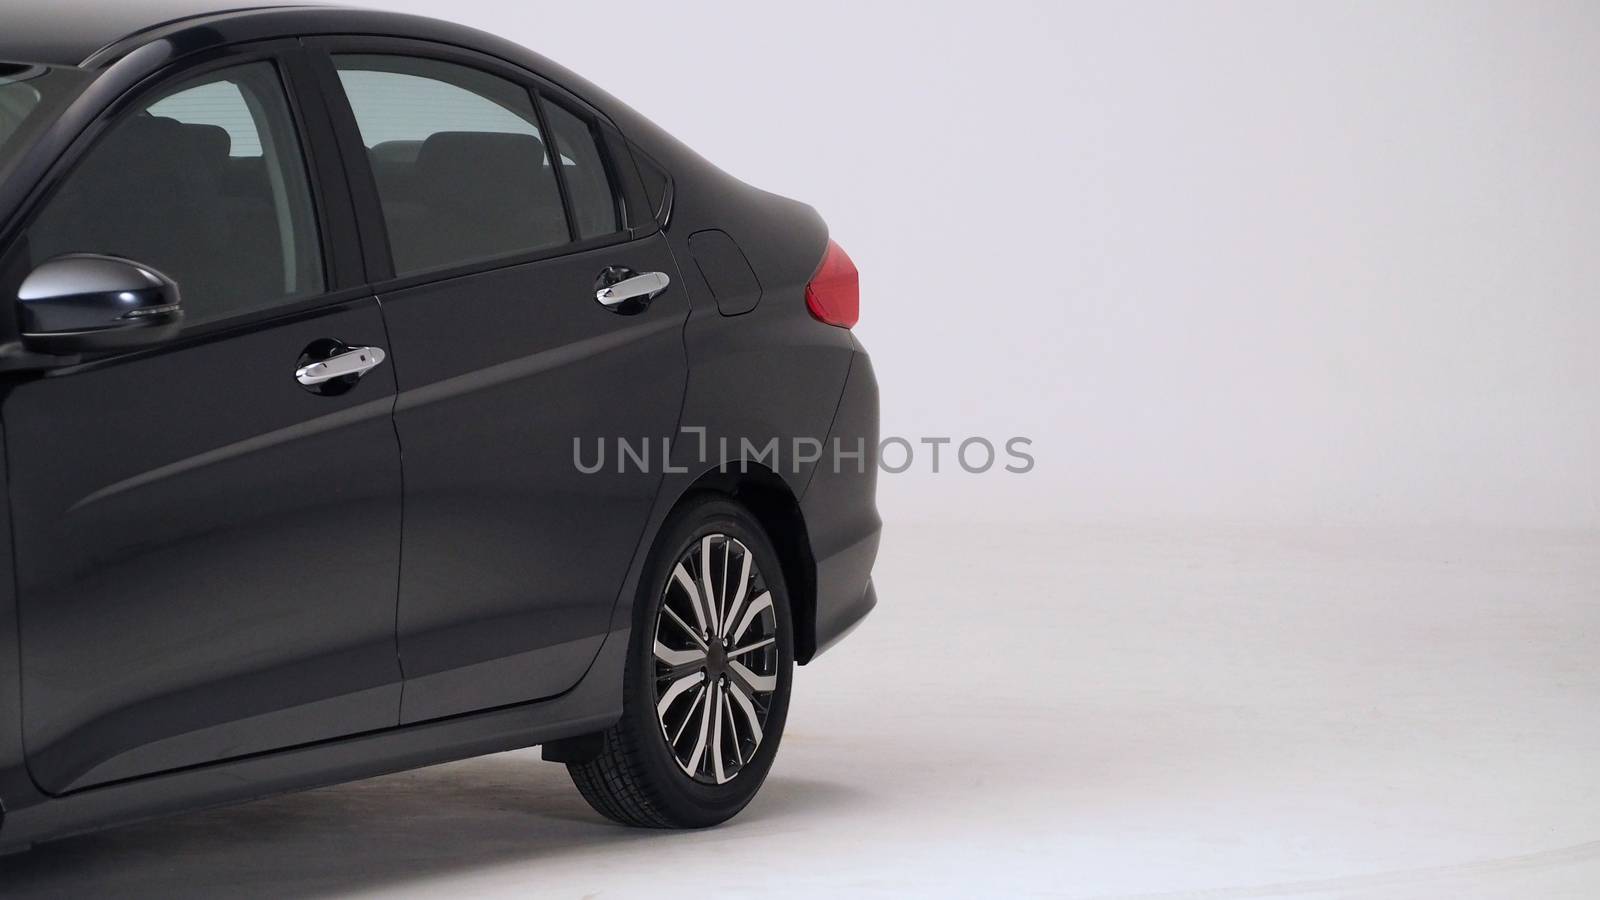 Parts of automotive car black color such as window, wheel, lamp, mirror, side shots shooting from front and rear on white background in studio production and for use in automobile industry.